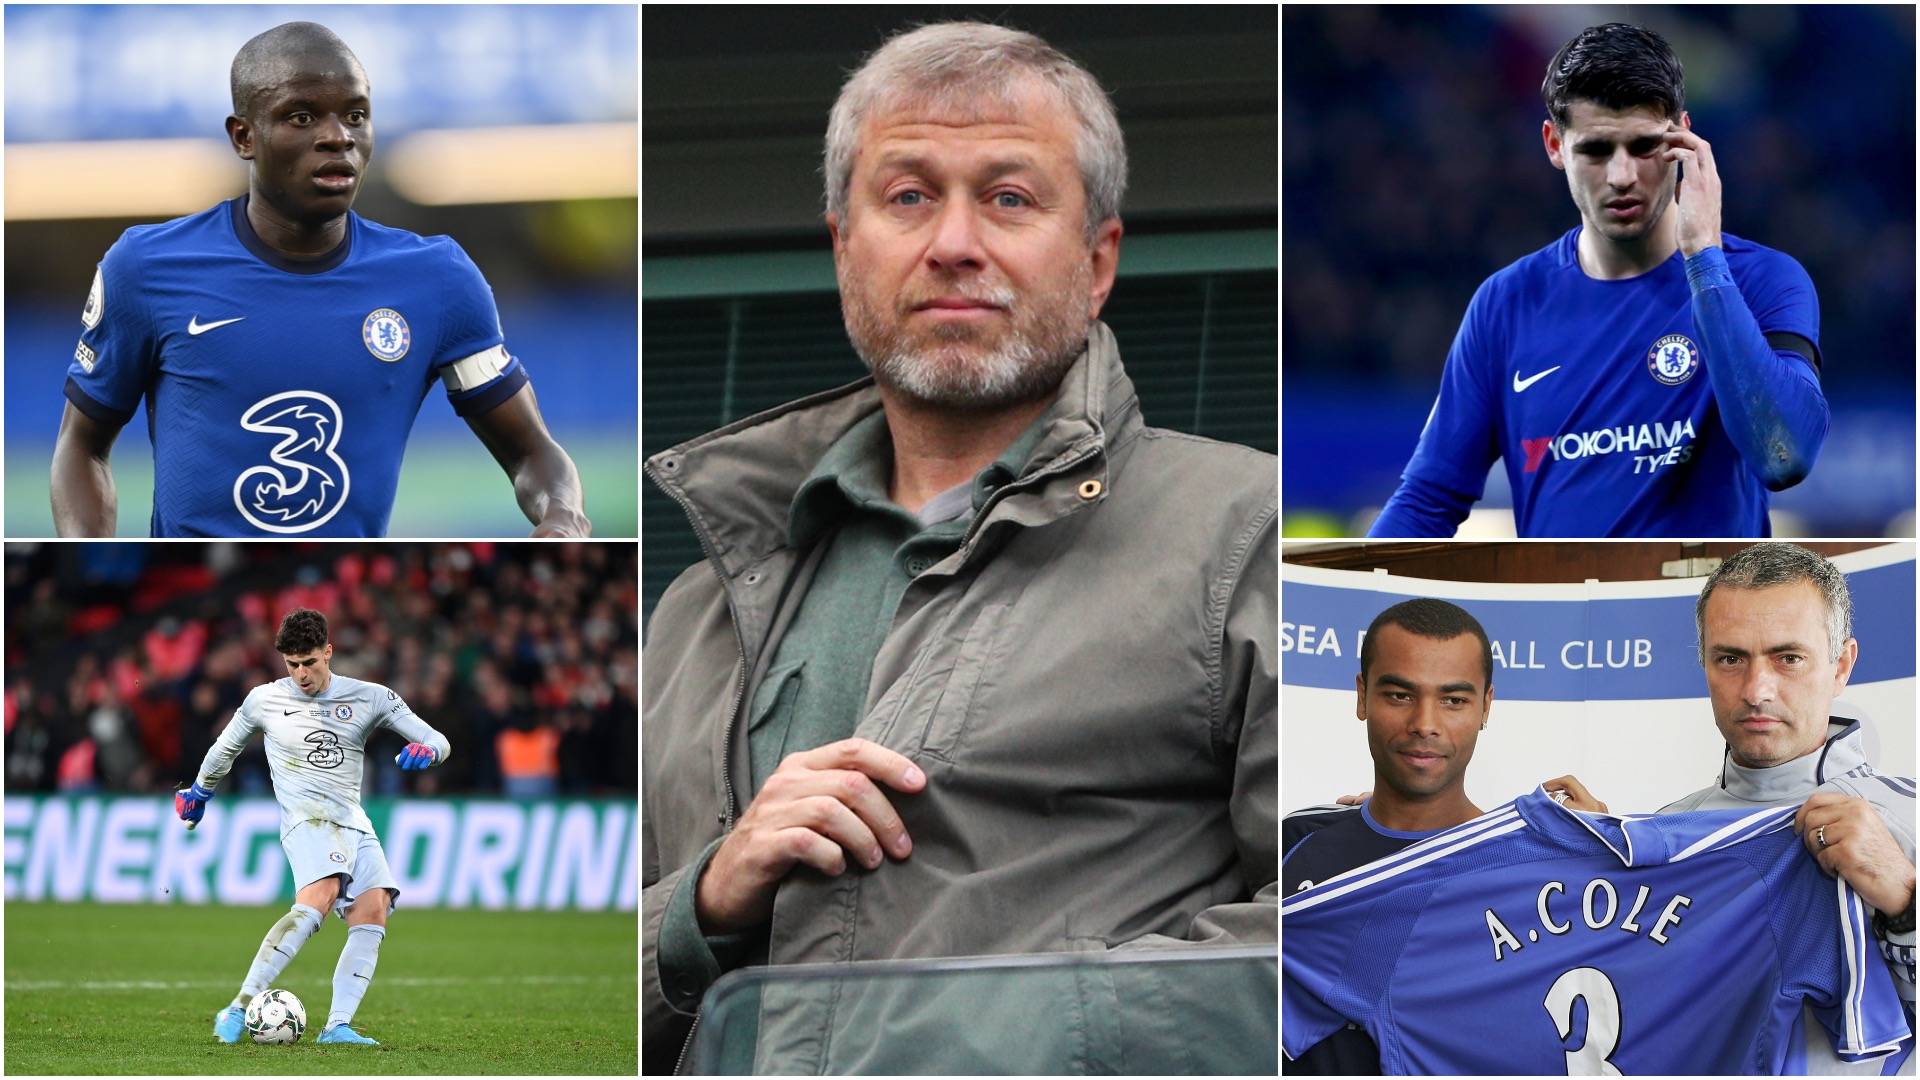 Ranking the 10 best and 10 worst signings Chelsea made under Roman Abramovich